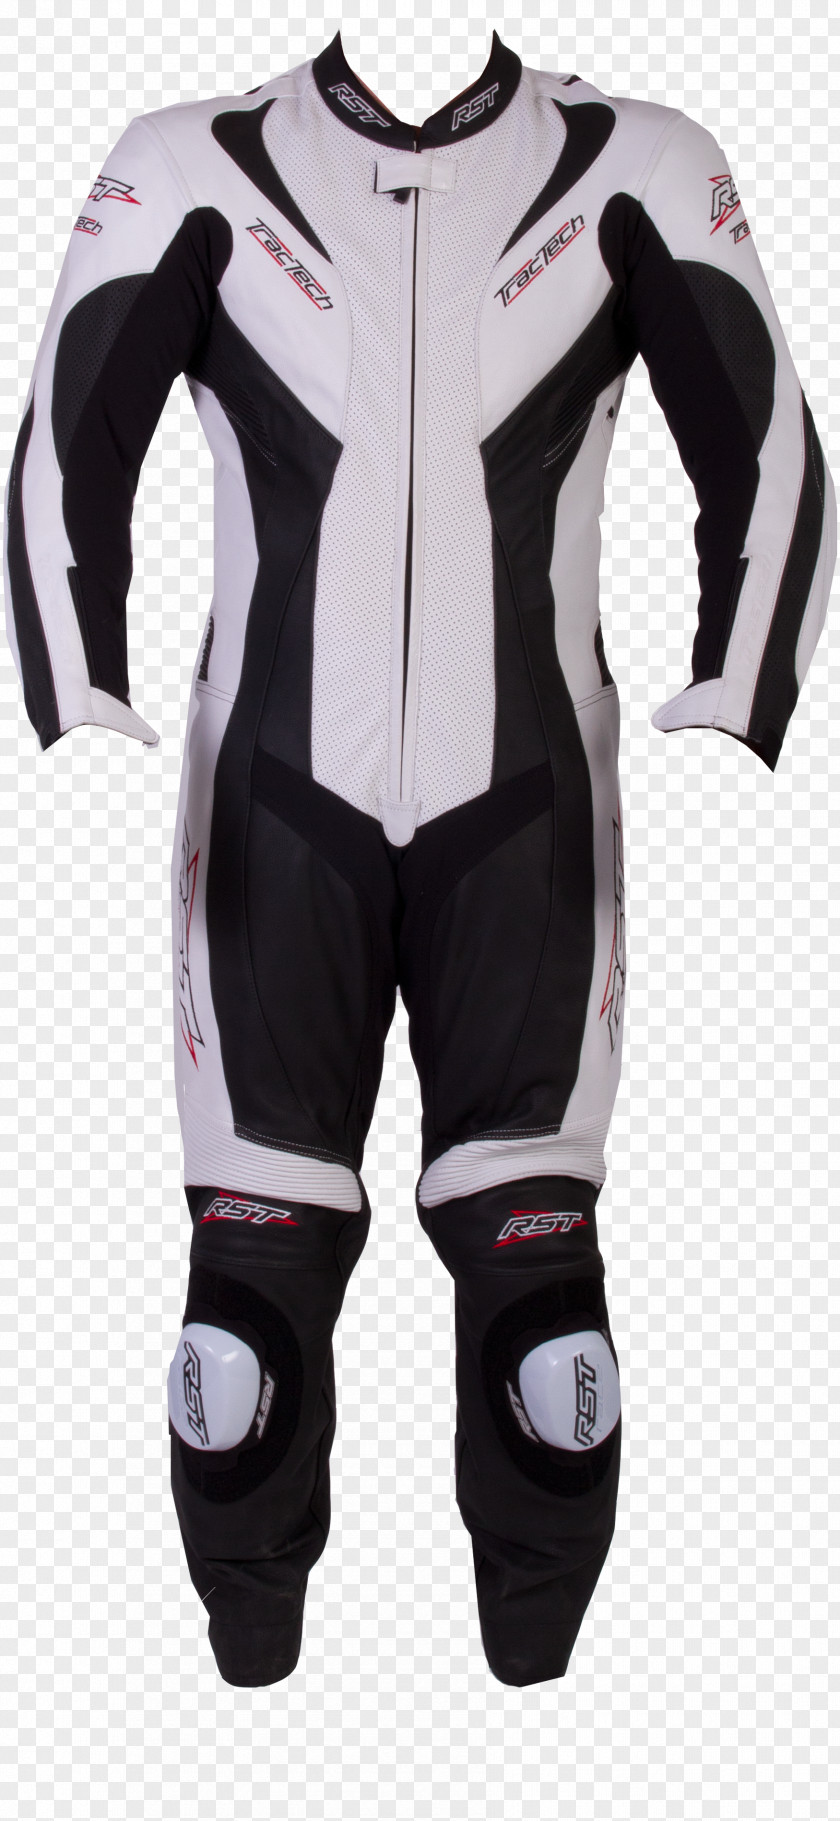 Protective Clothing Motorcycle Bodysuit Jacket PNG